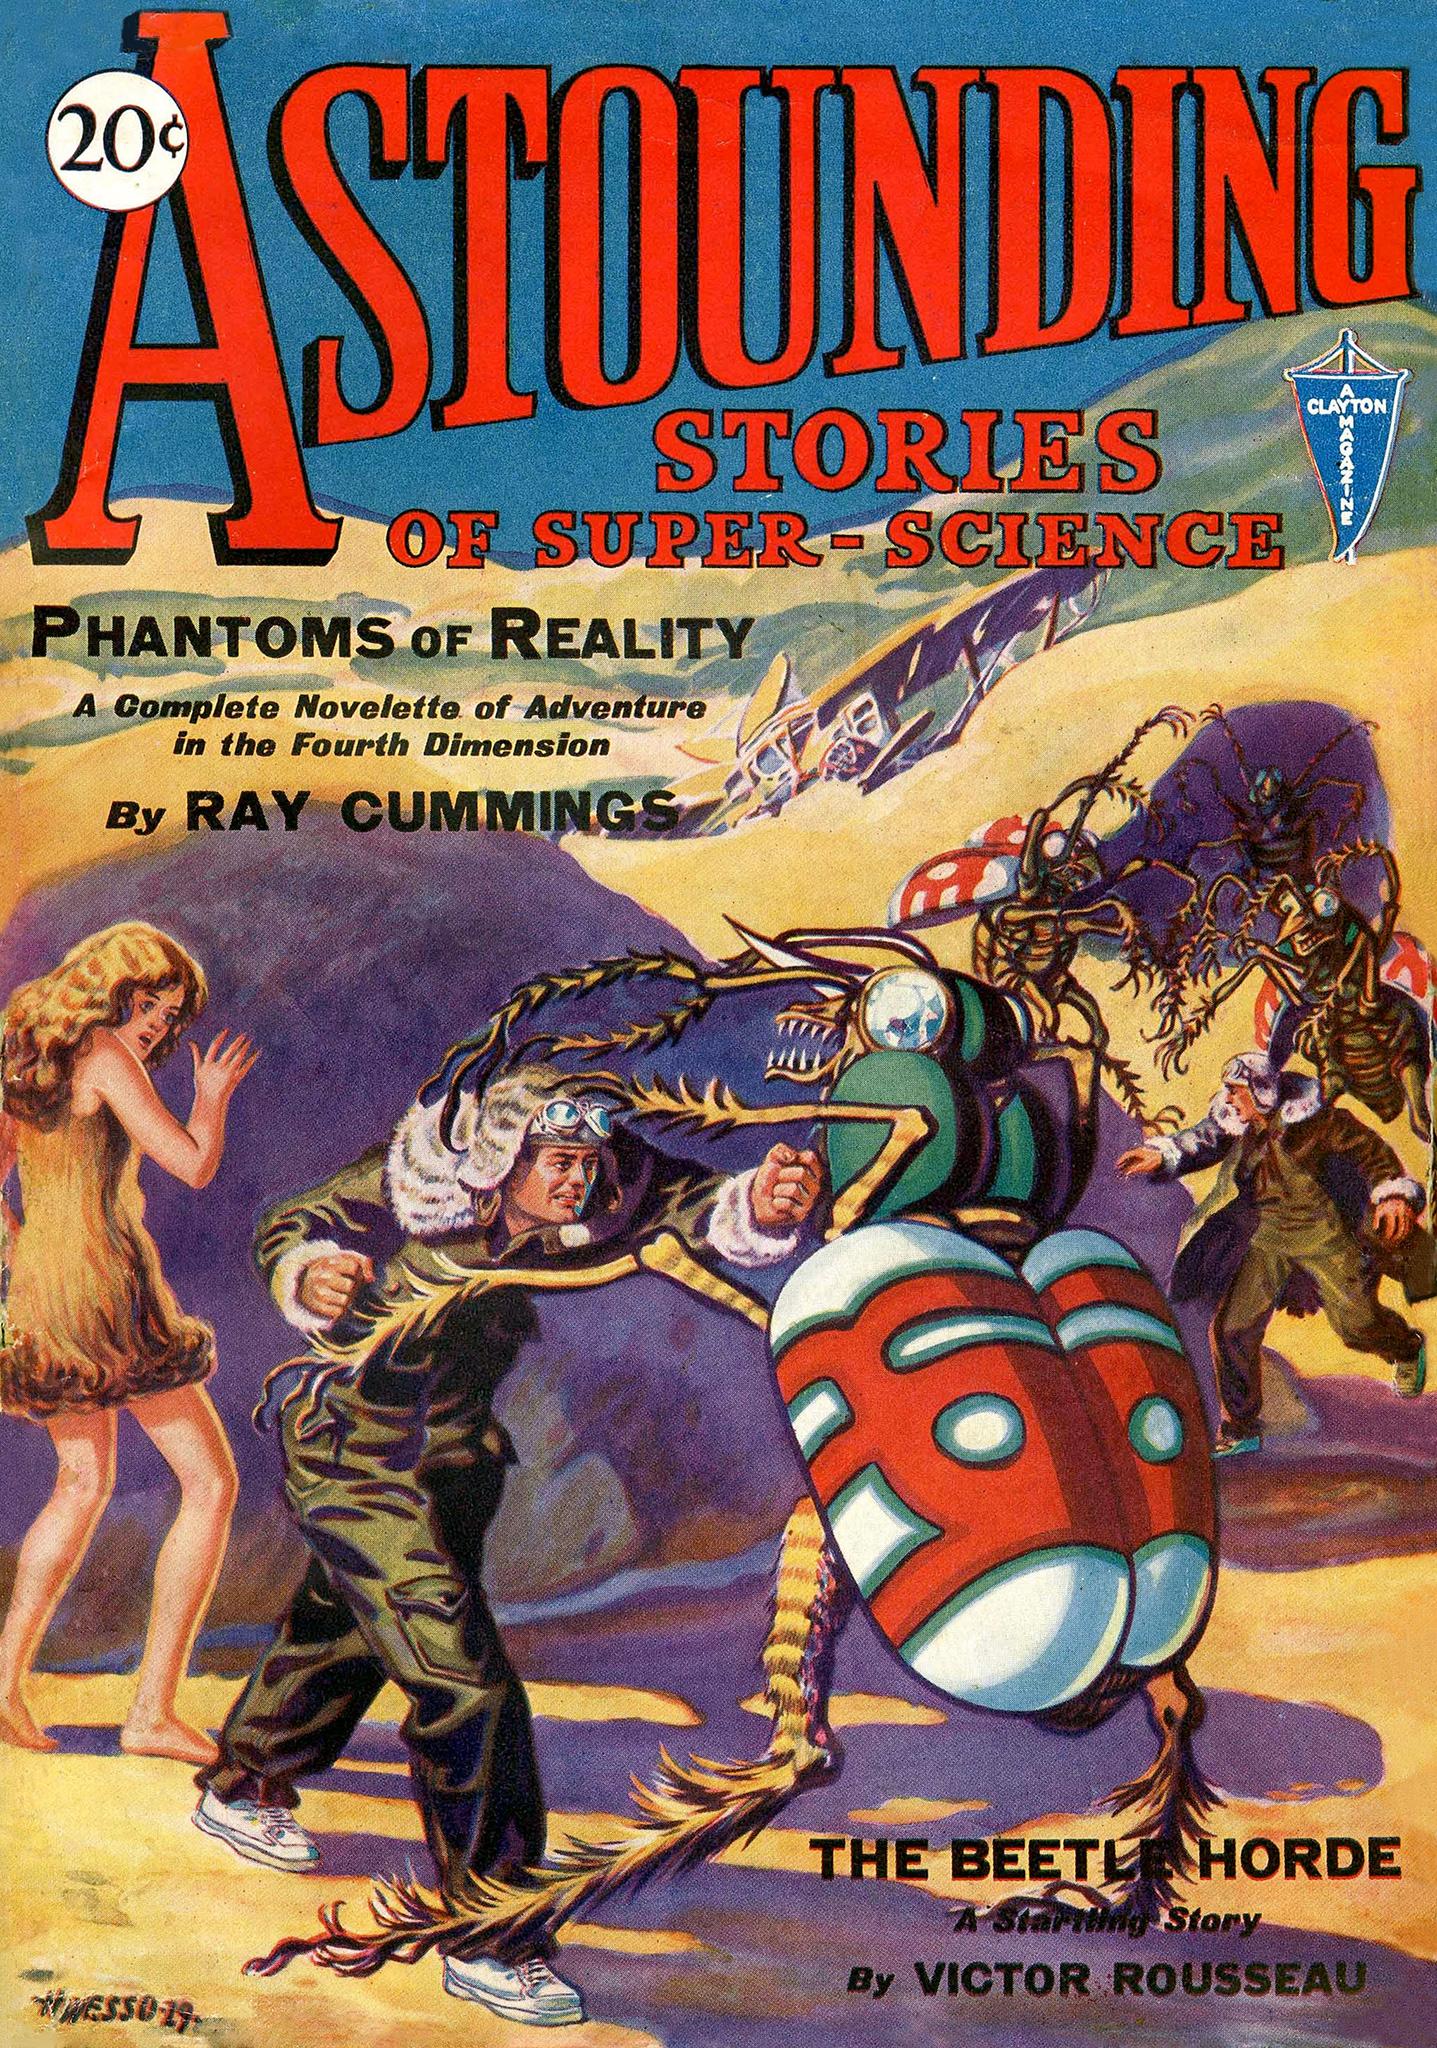 When we think of the Golden Age we think of the classic science fiction tropes. Sleek rockets and square-jawed heroes, damsels in distress menaced by slimy, tentacled aliens